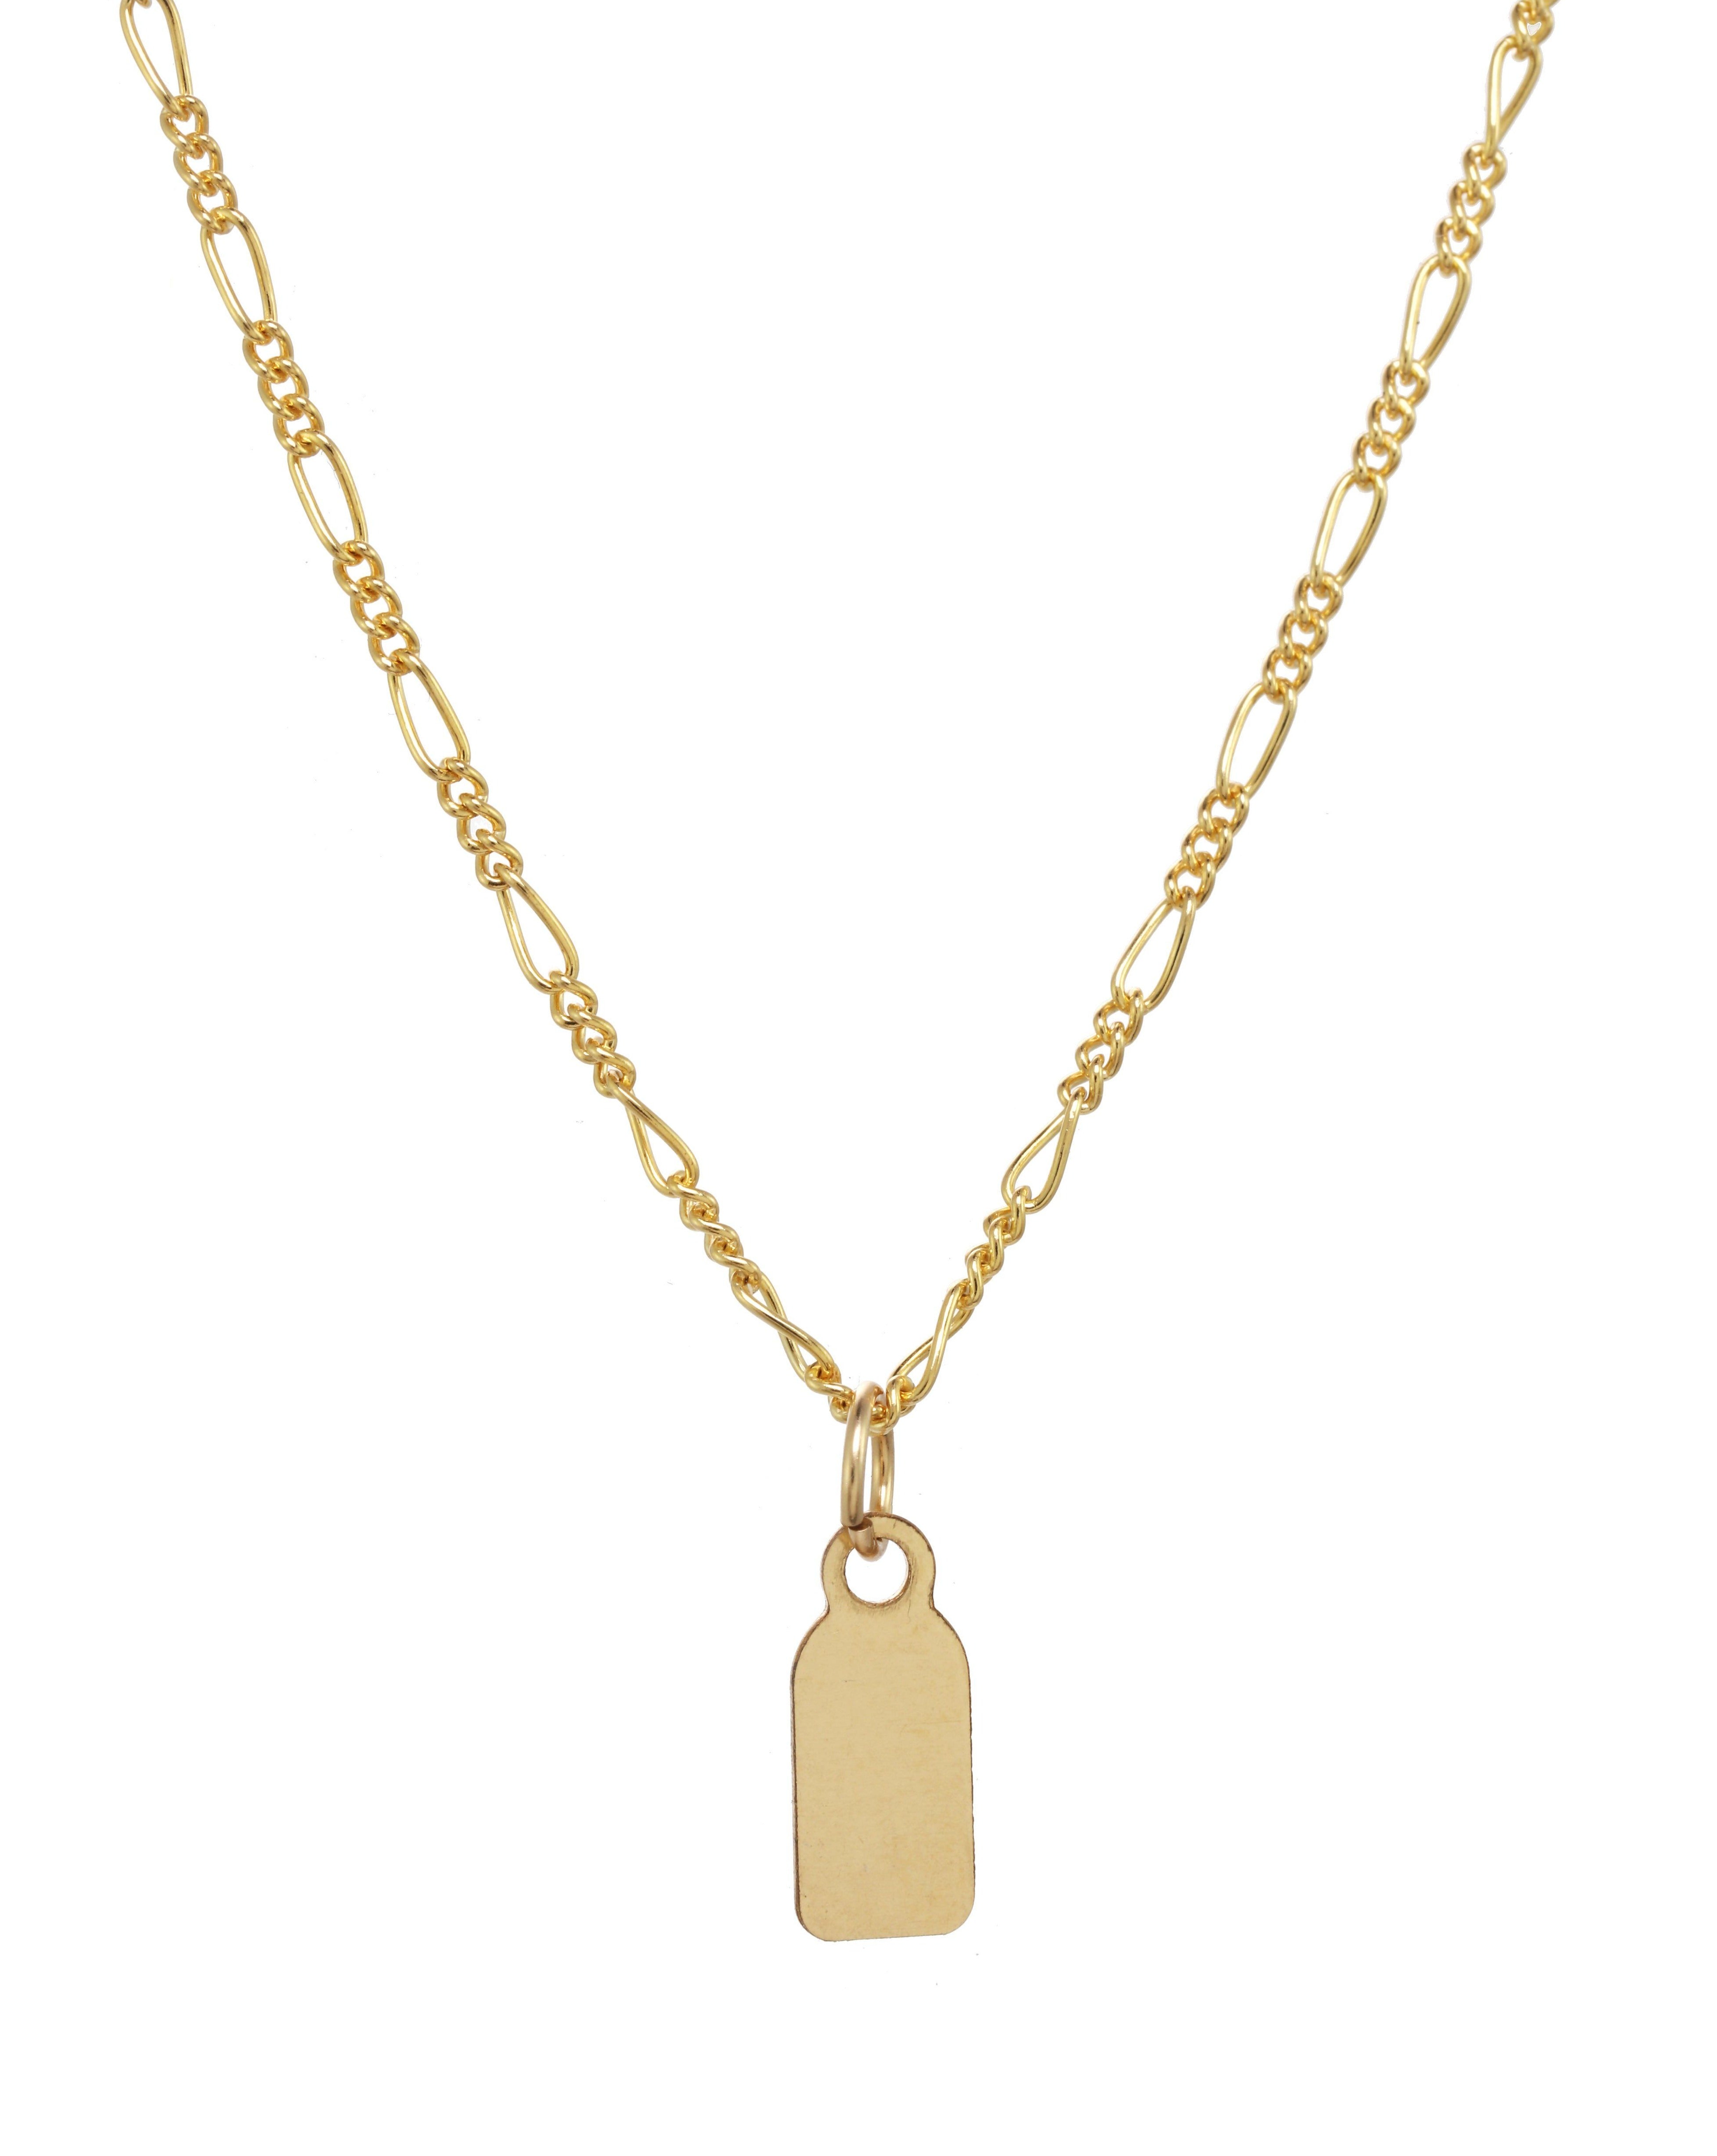 Chetta Necklace by KOZAKH. A 16 inch long necklace in 14K Gold Filled, featuring a tag charm.